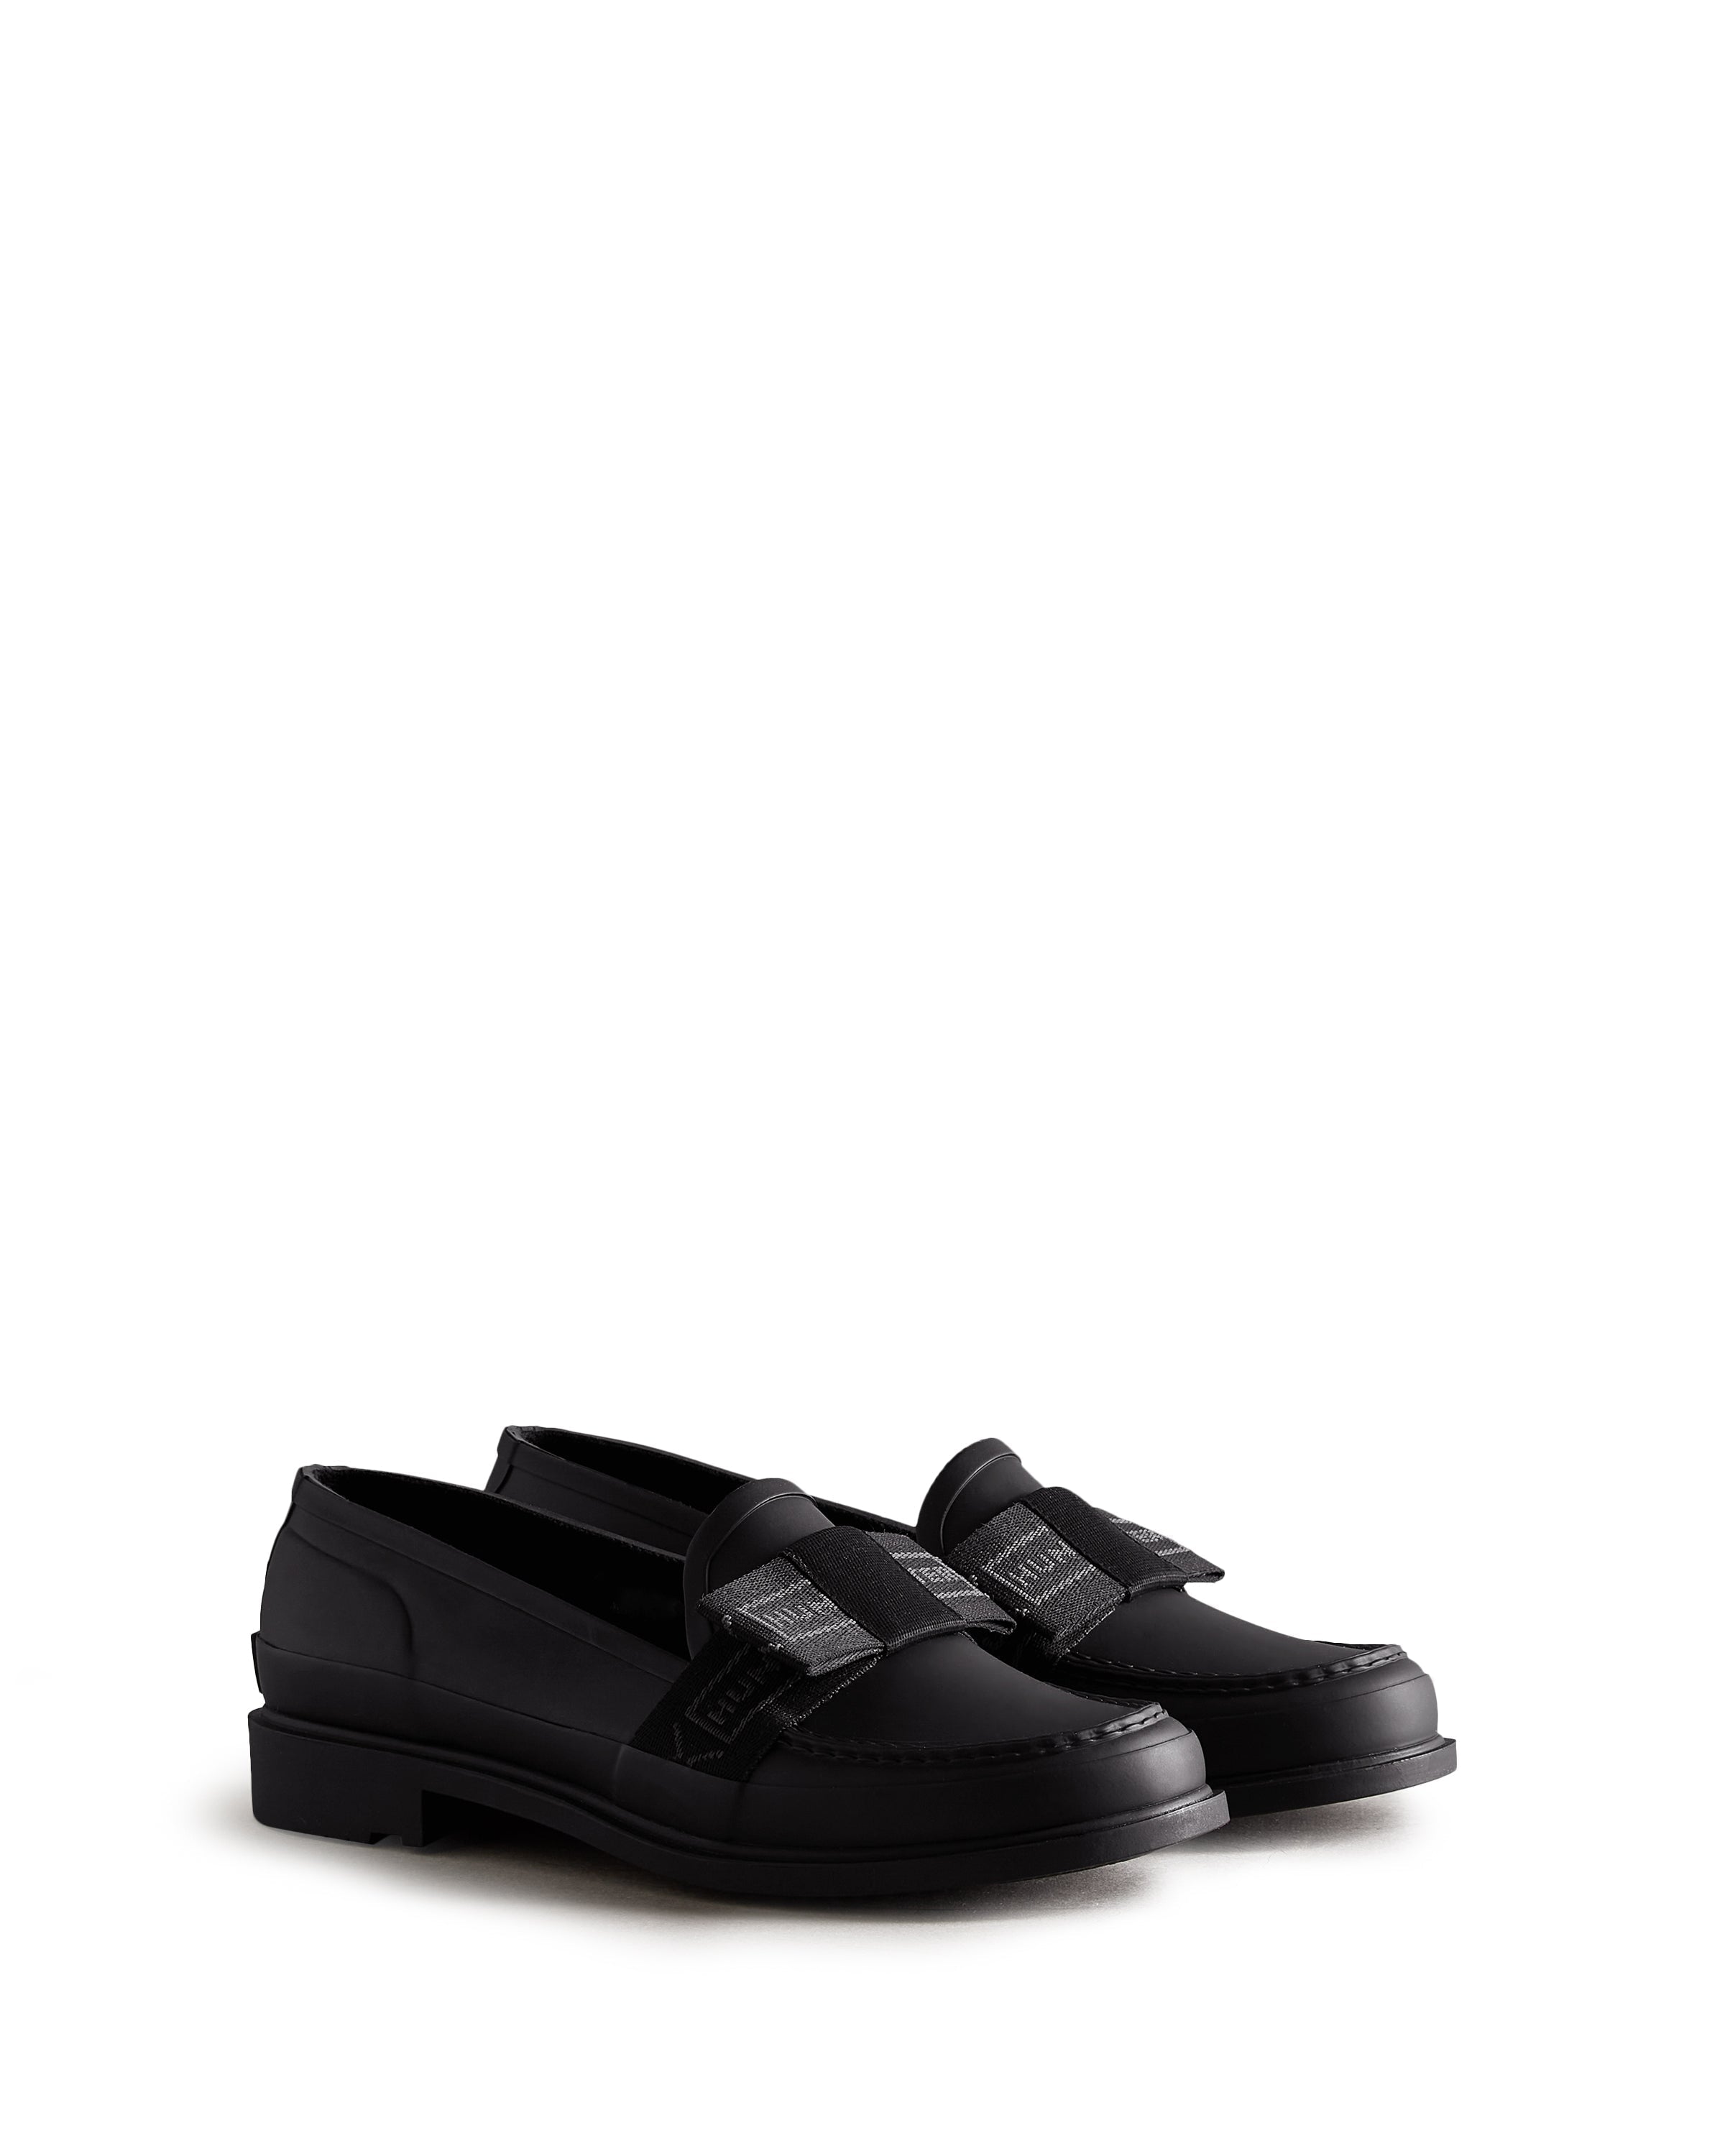 Women's Refined Bow Penny Loafers - Black